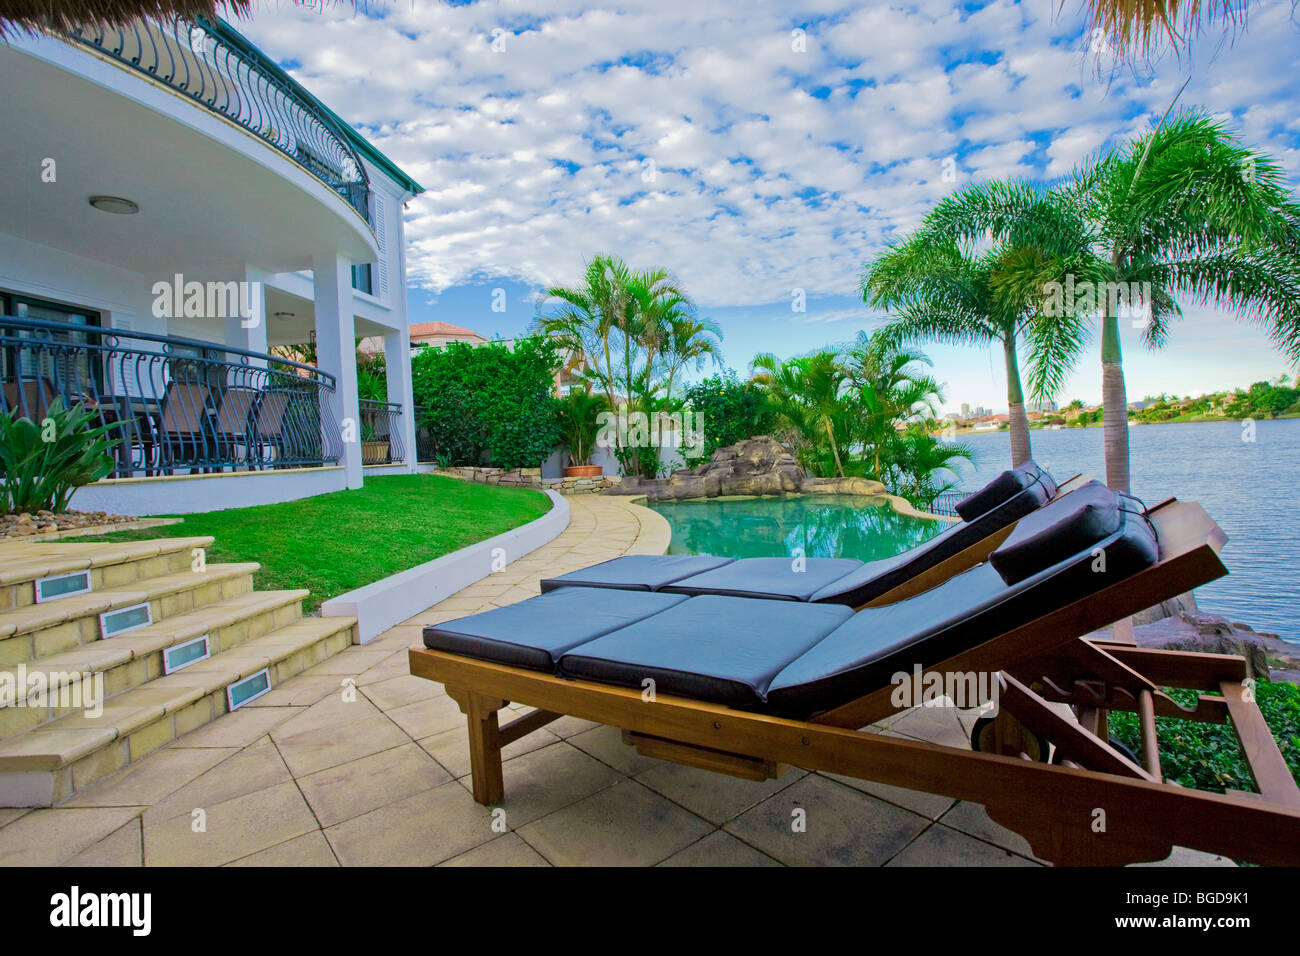 Sedie a sdraio in piscina a waterfront mansion Foto Stock